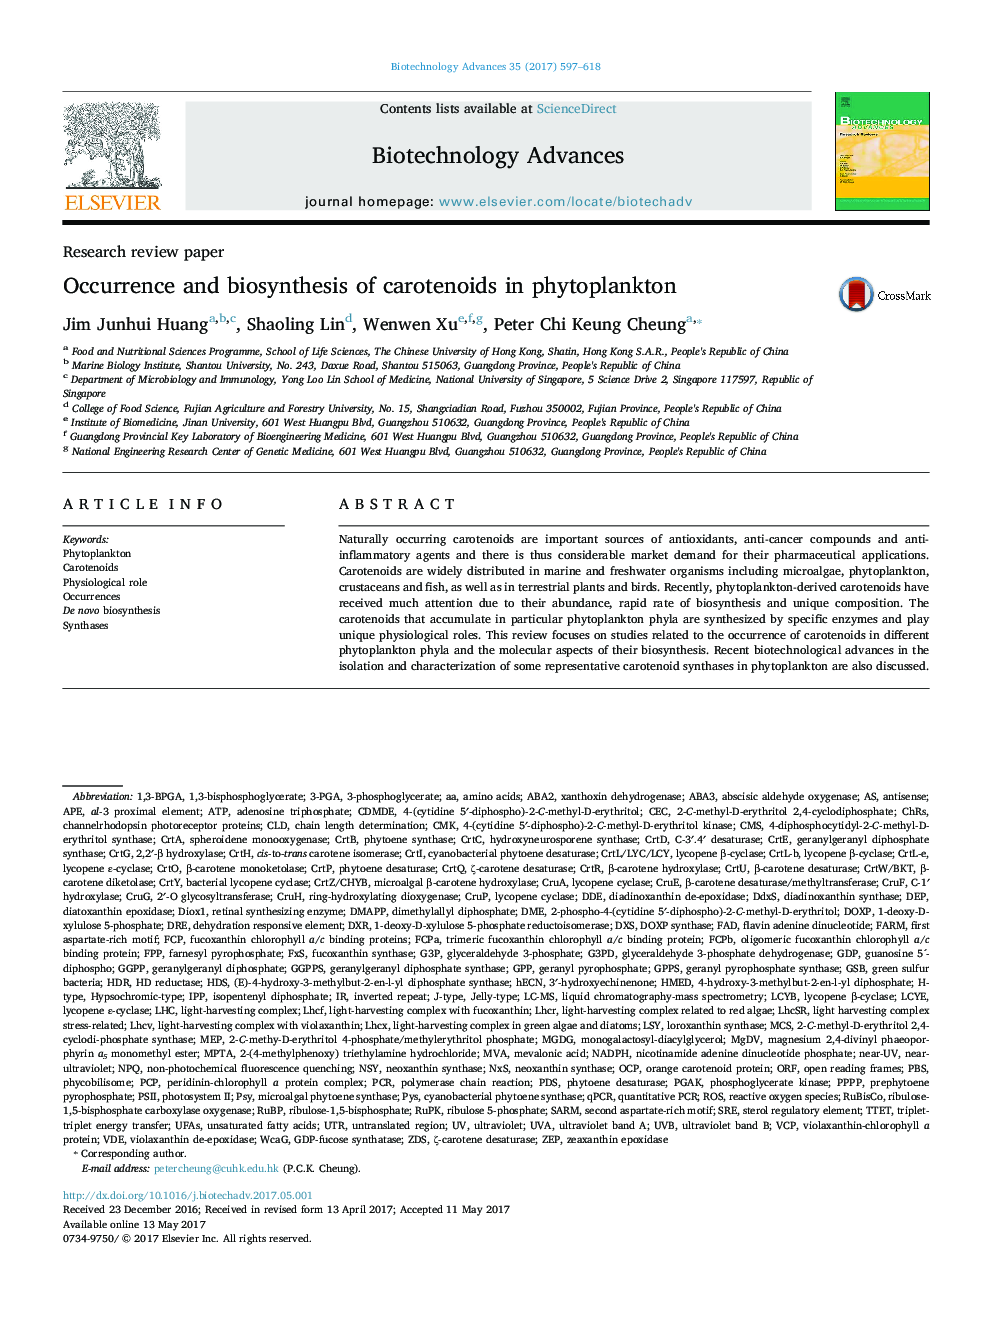 Research review paperOccurrence and biosynthesis of carotenoids in phytoplankton